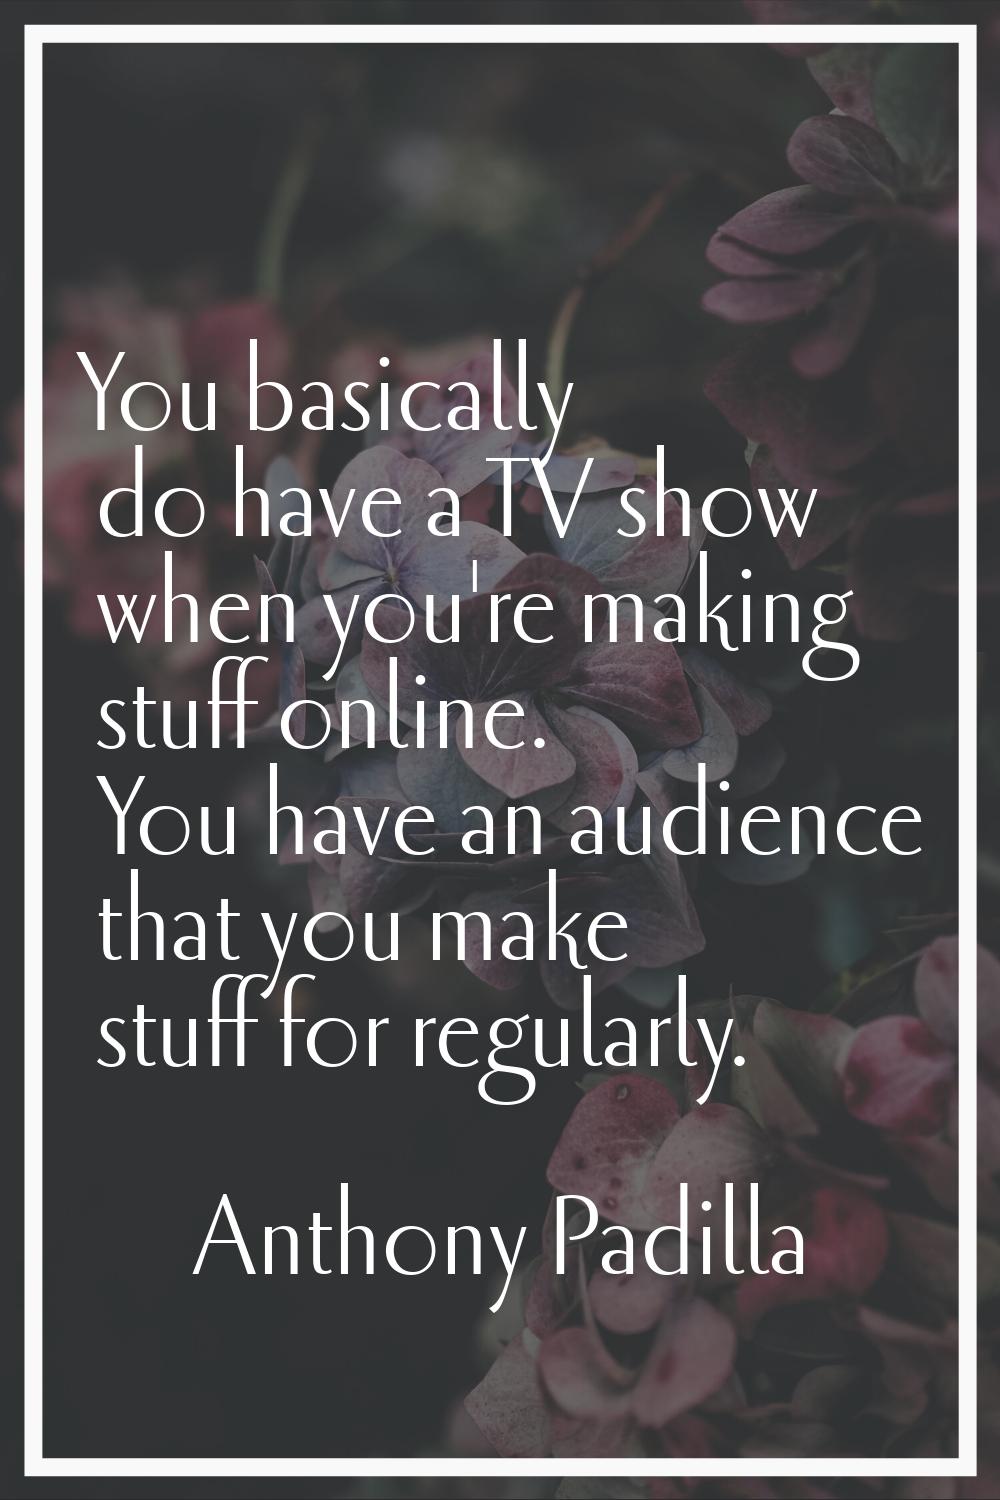 You basically do have a TV show when you're making stuff online. You have an audience that you make